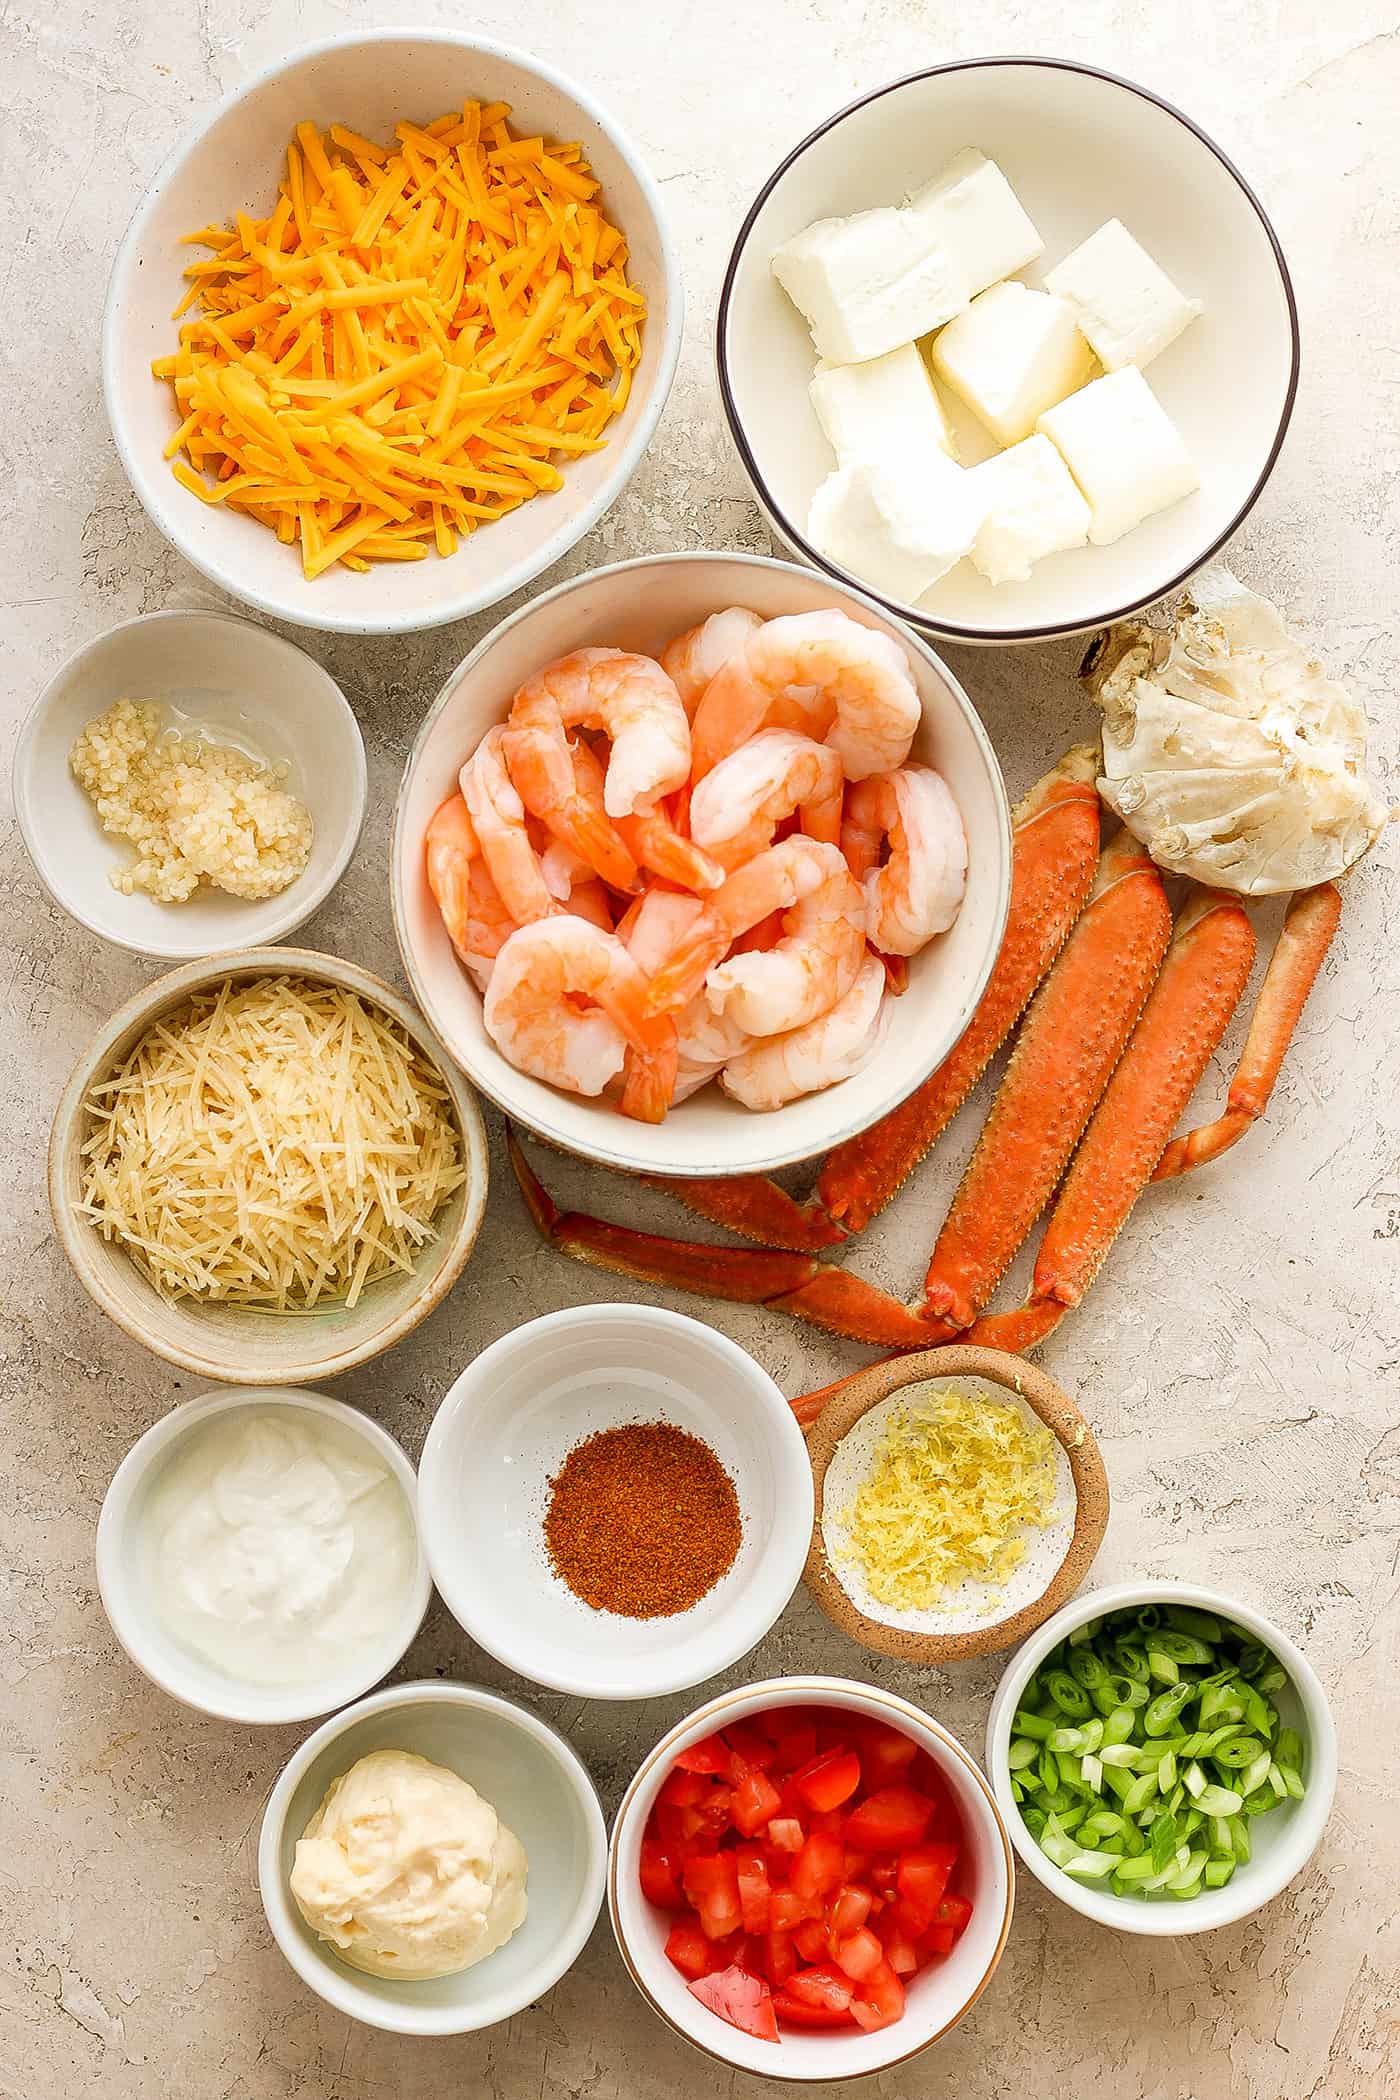 The ingredients for shrimp and crab dip are shown on a white background: shrimp, crab, garlic, shredded cheddar cheese, shredded parmesan cheese, sour cream, cream cheese, garlic, tomatoes, green onions.